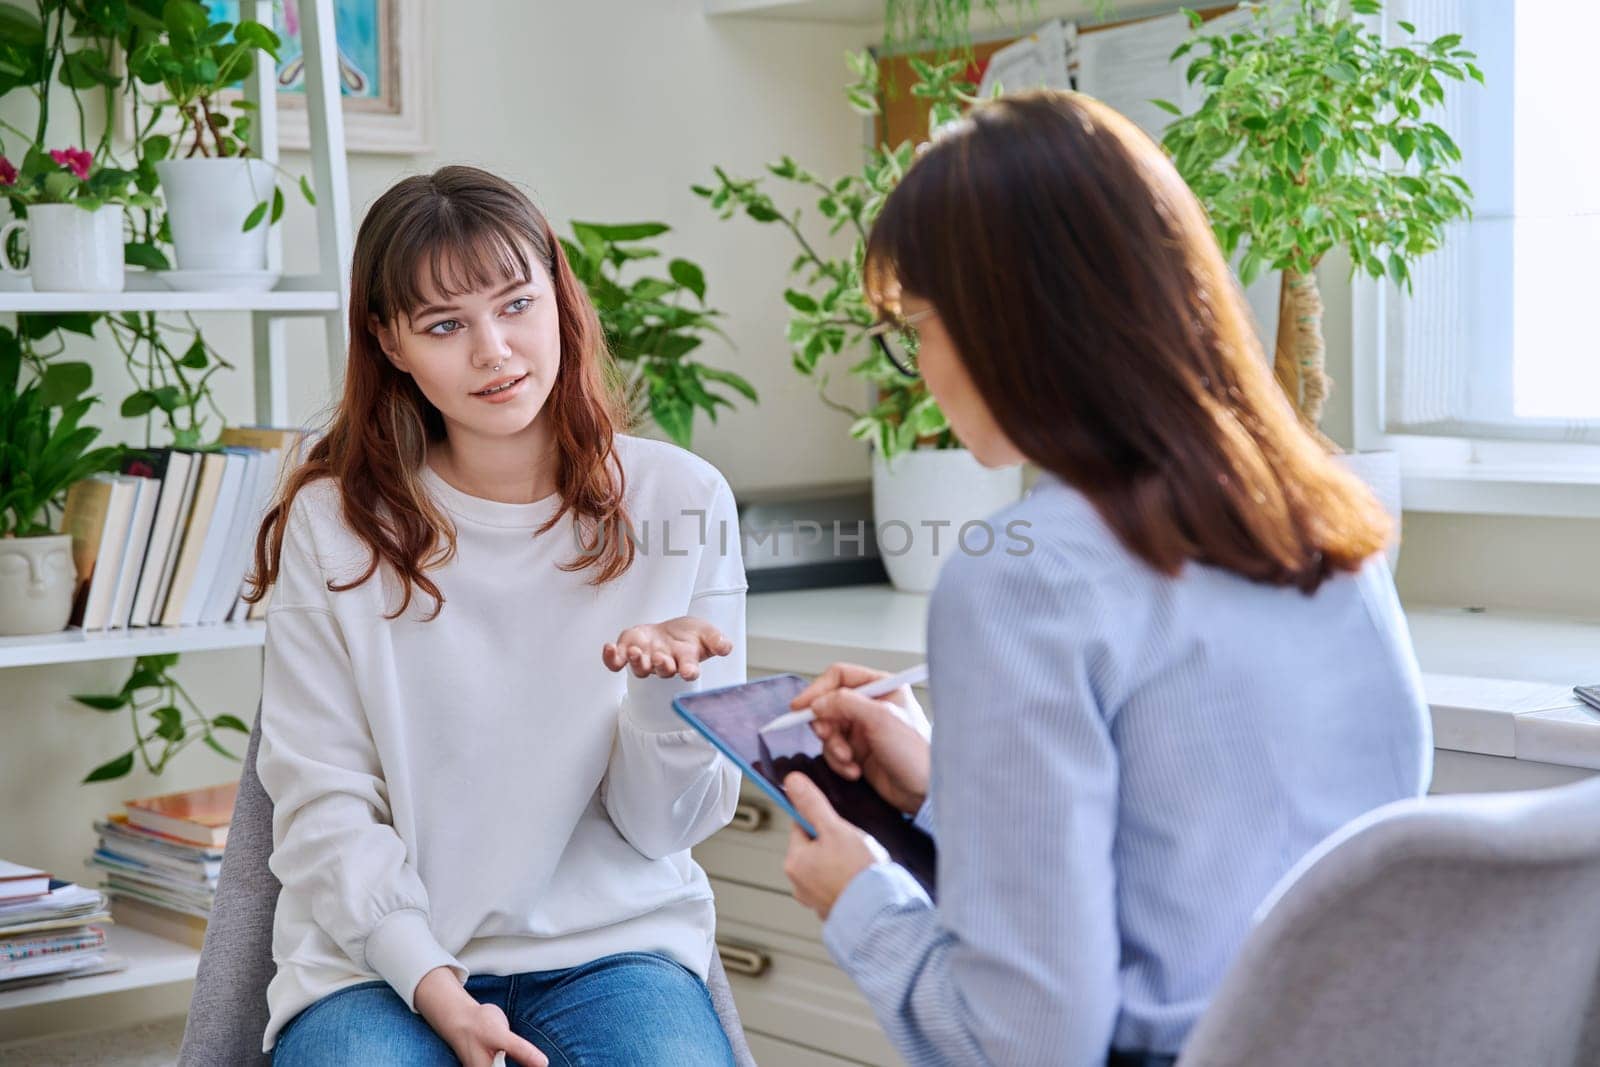 Teenage girl college student at therapy meeting with mental health professional social worker psychologist counselor sitting together in office. Psychology, psychotherapy, mental assistance support